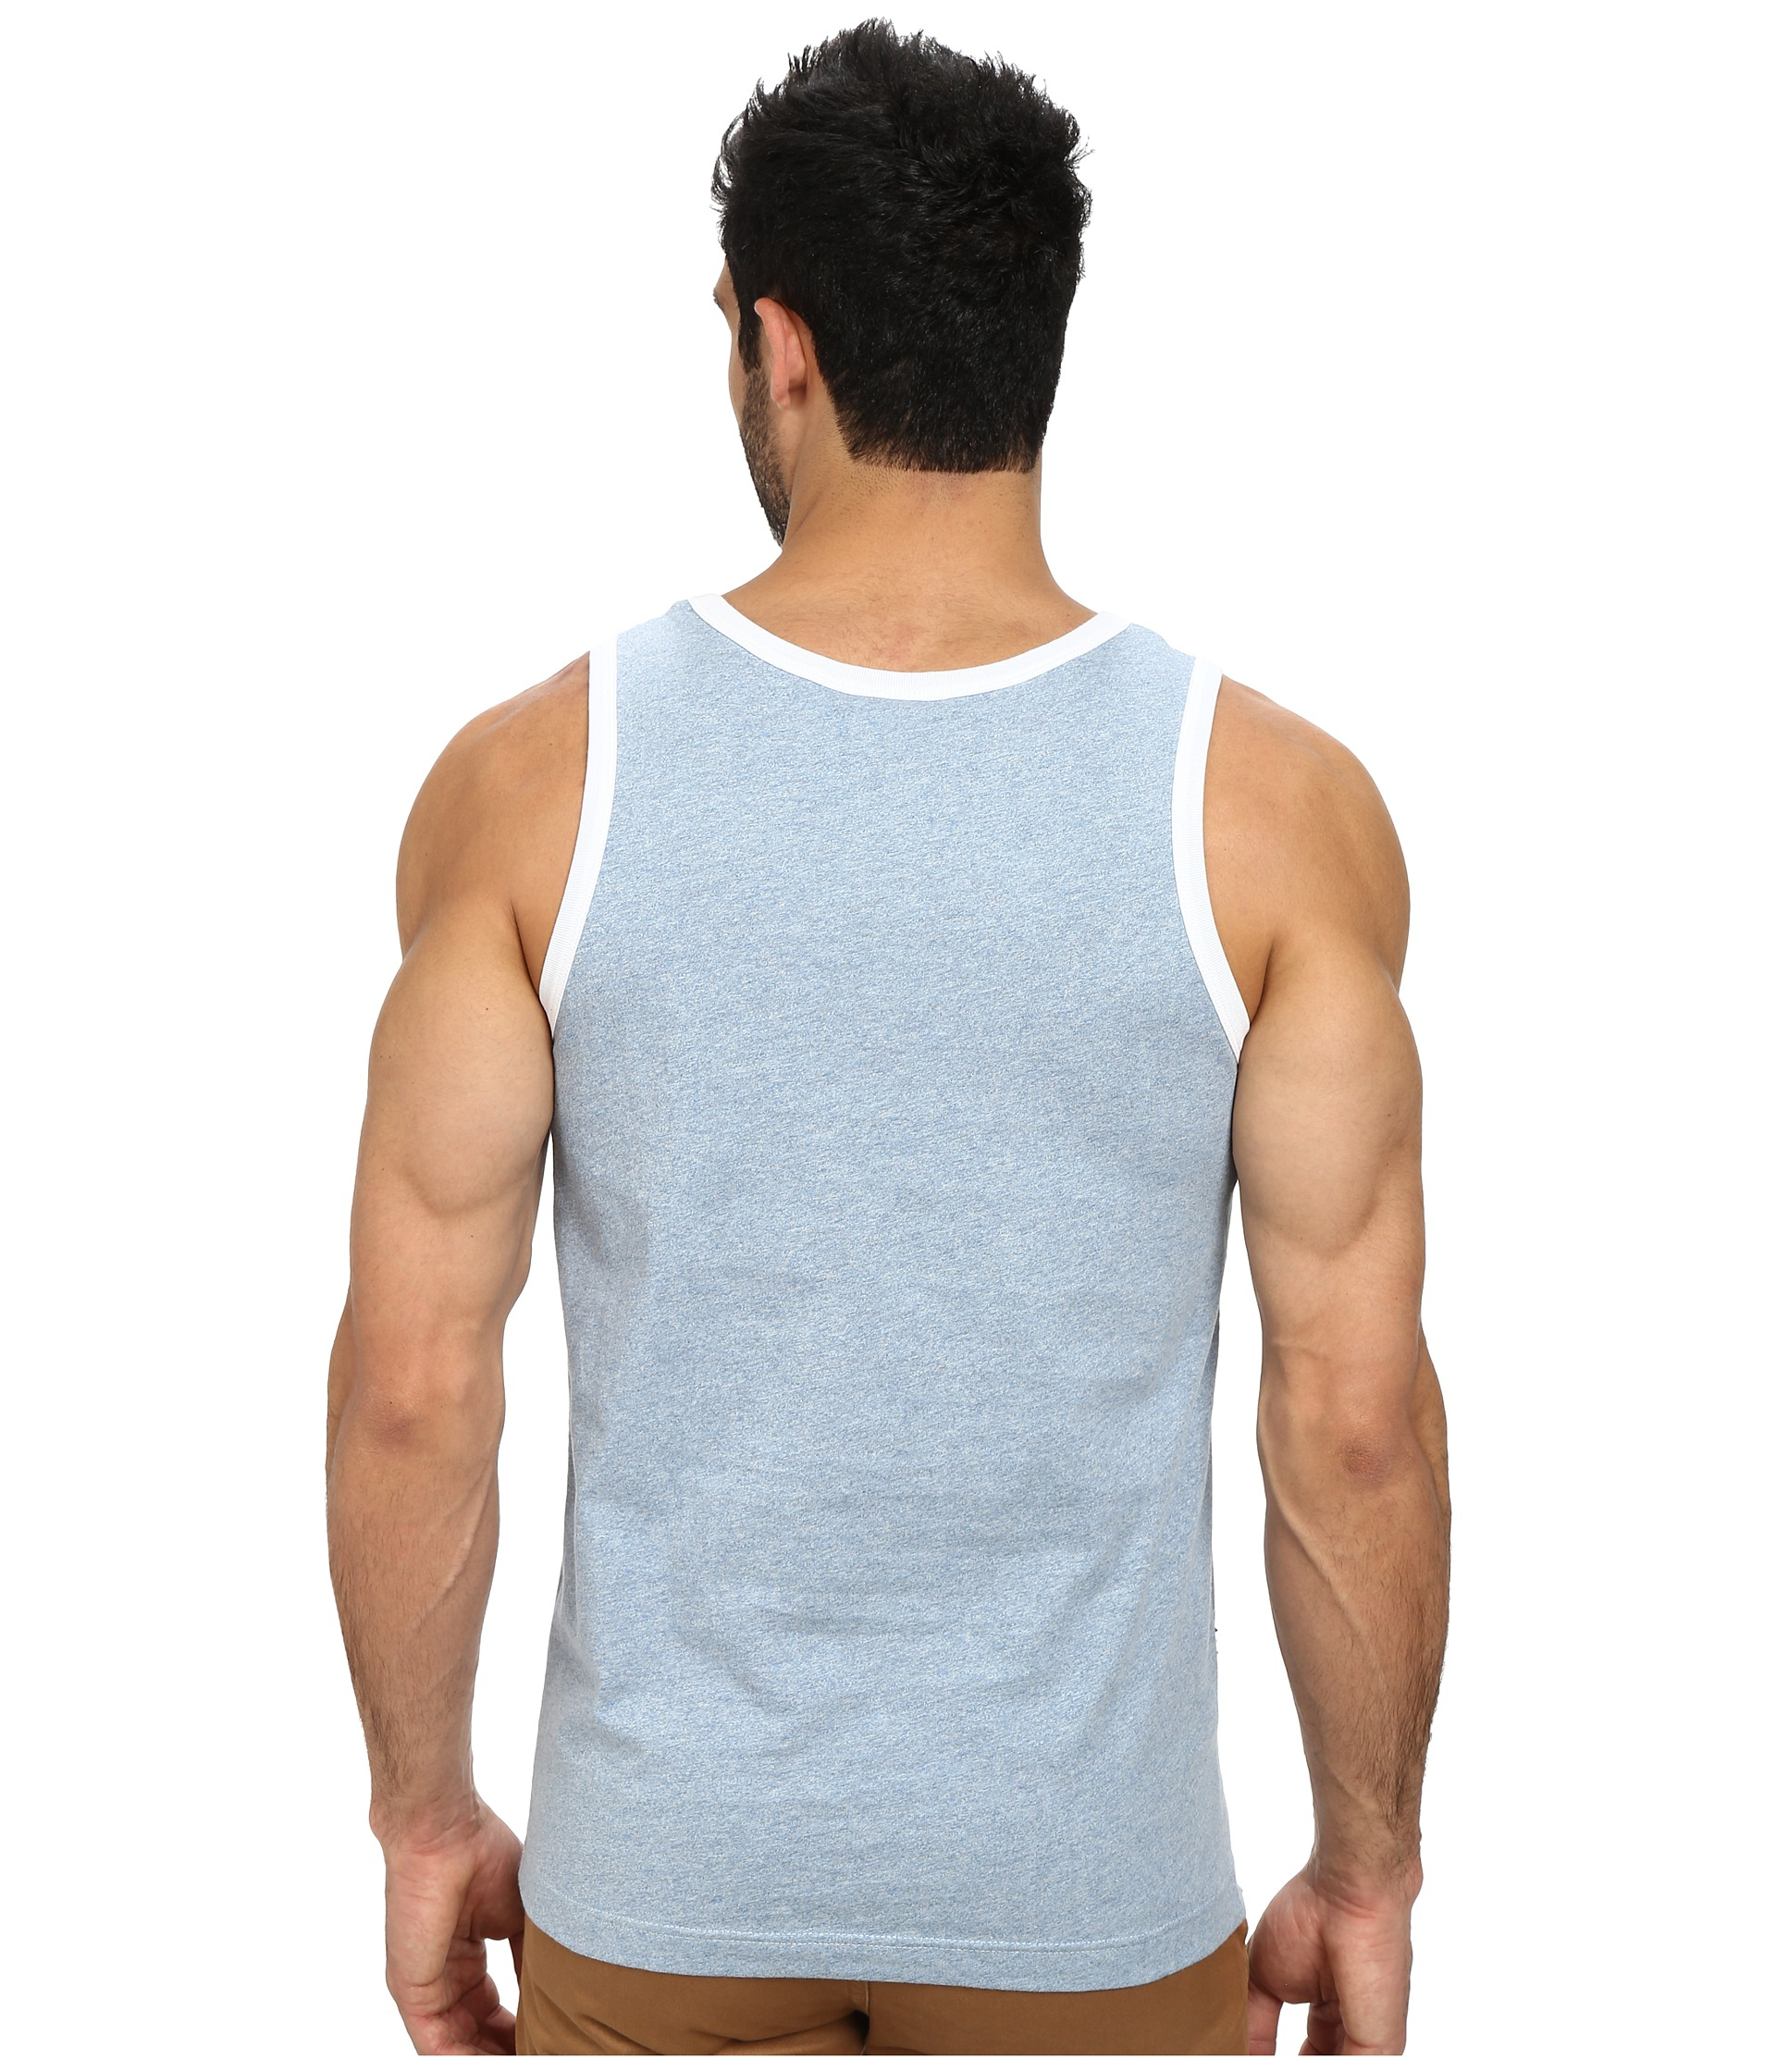 Lyst - Lacoste Live Cotton Jersey With Contrast Trim Tank Top in Blue ...